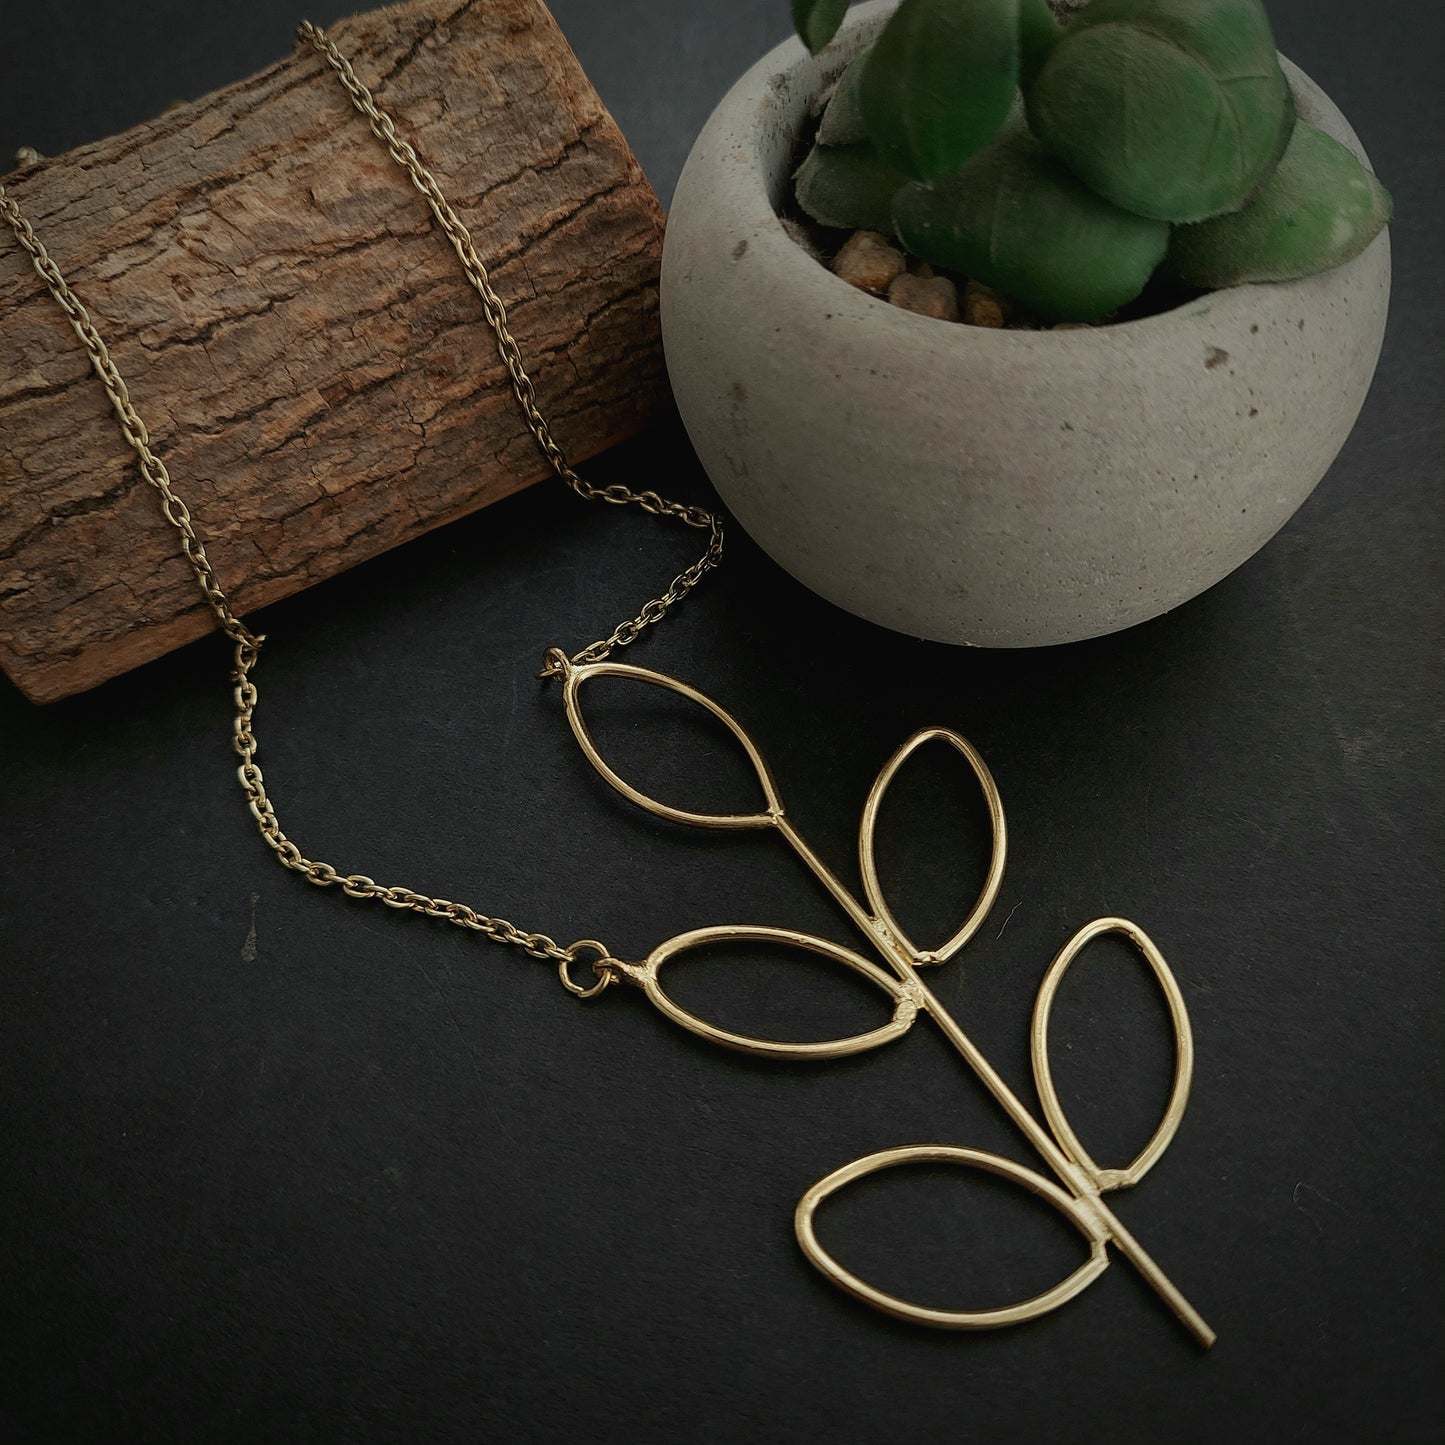 Stylish Long Brass Necklace with Pinnate Leaves Pendant